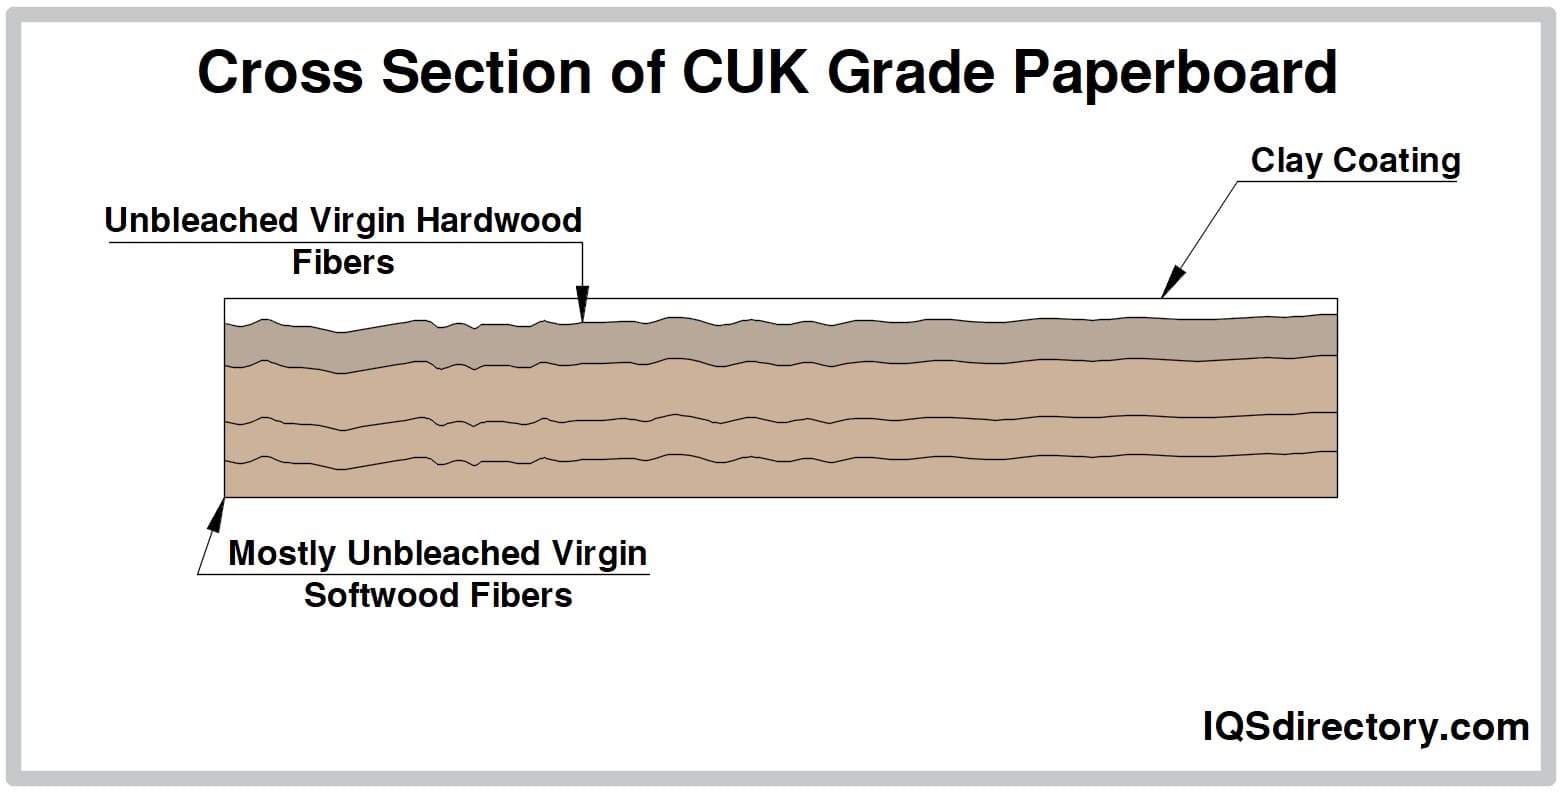 Cross Section of CUK Grade Paperboard